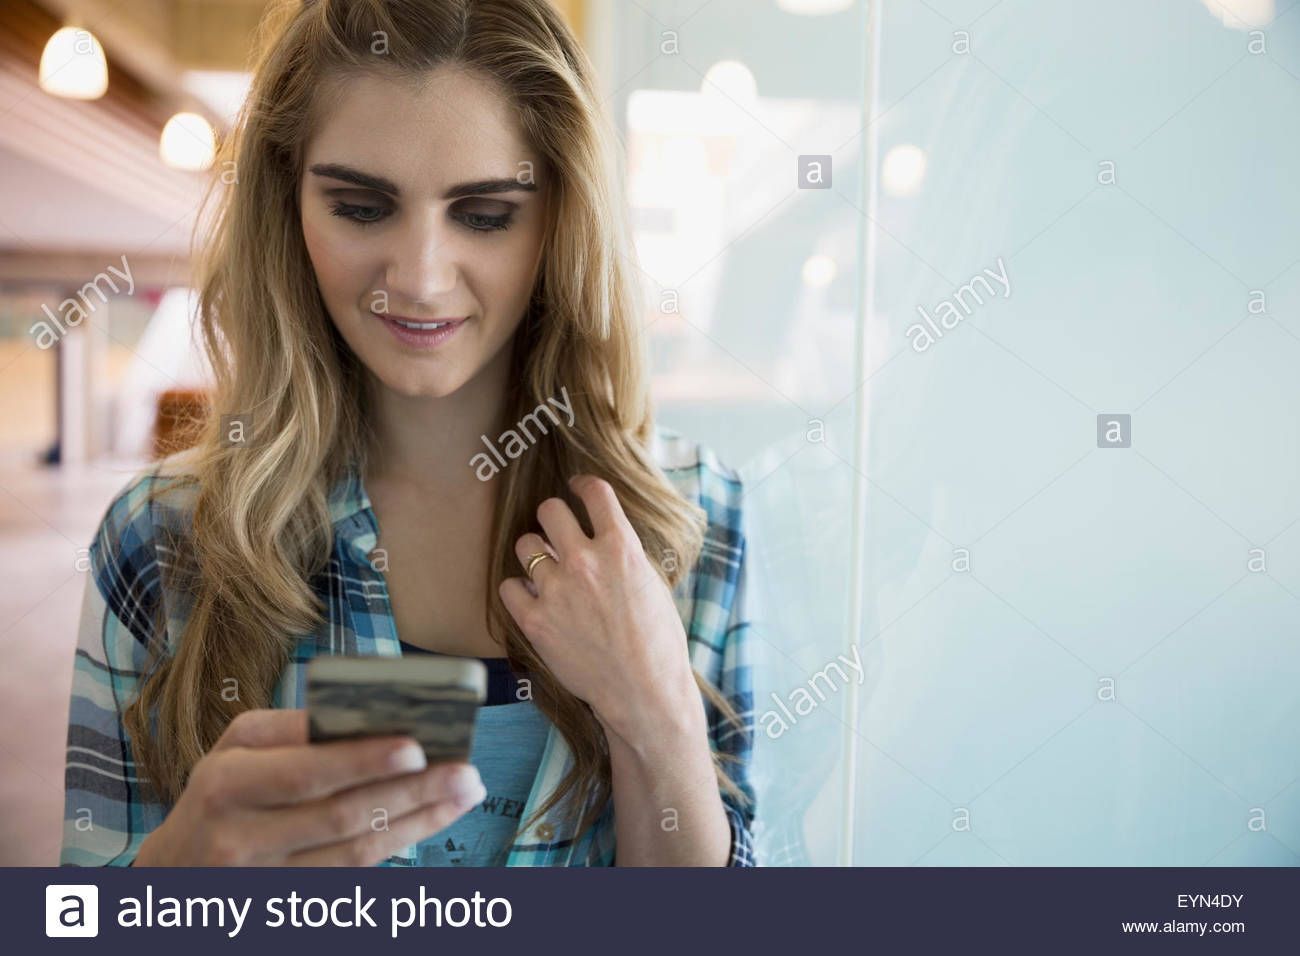 Blonde woman texting with cell phone at window Stock Photo